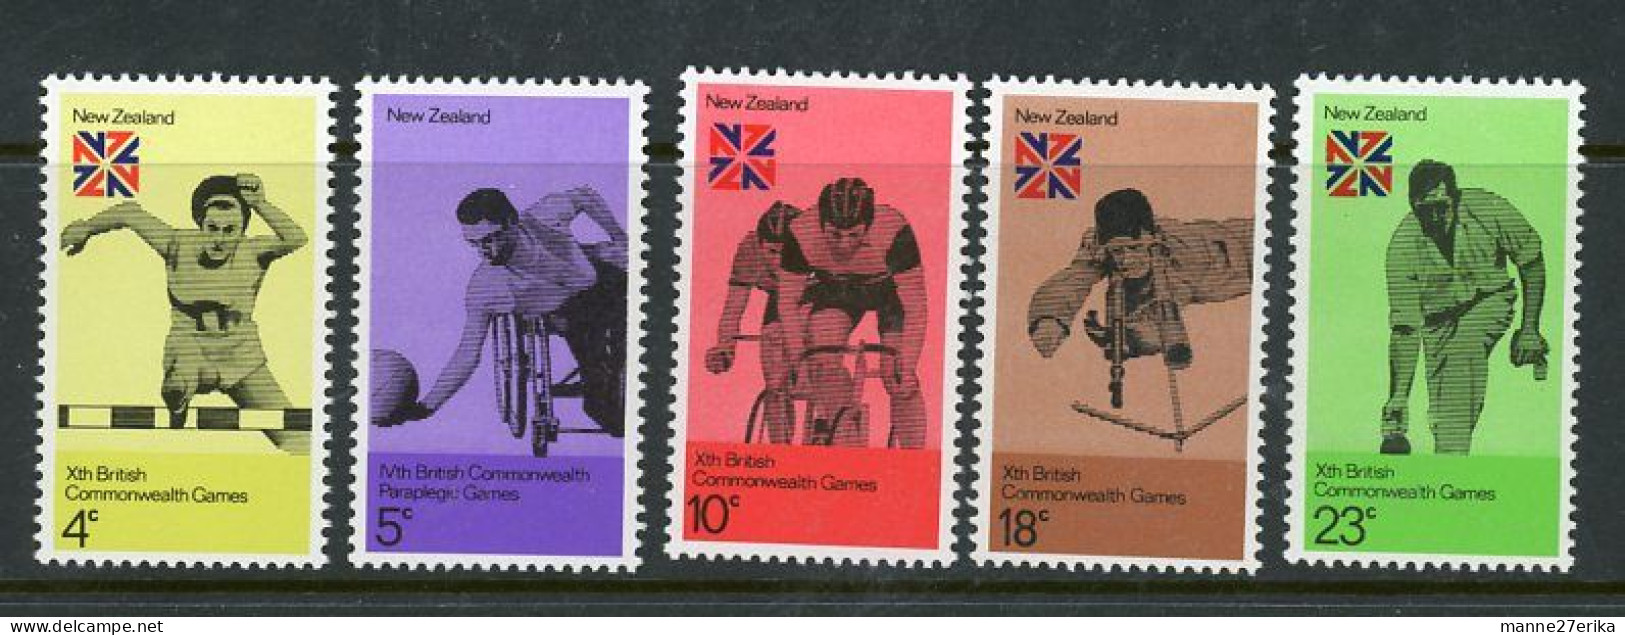 New Zealand 1974 MNH Commonwealth Games - Unused Stamps